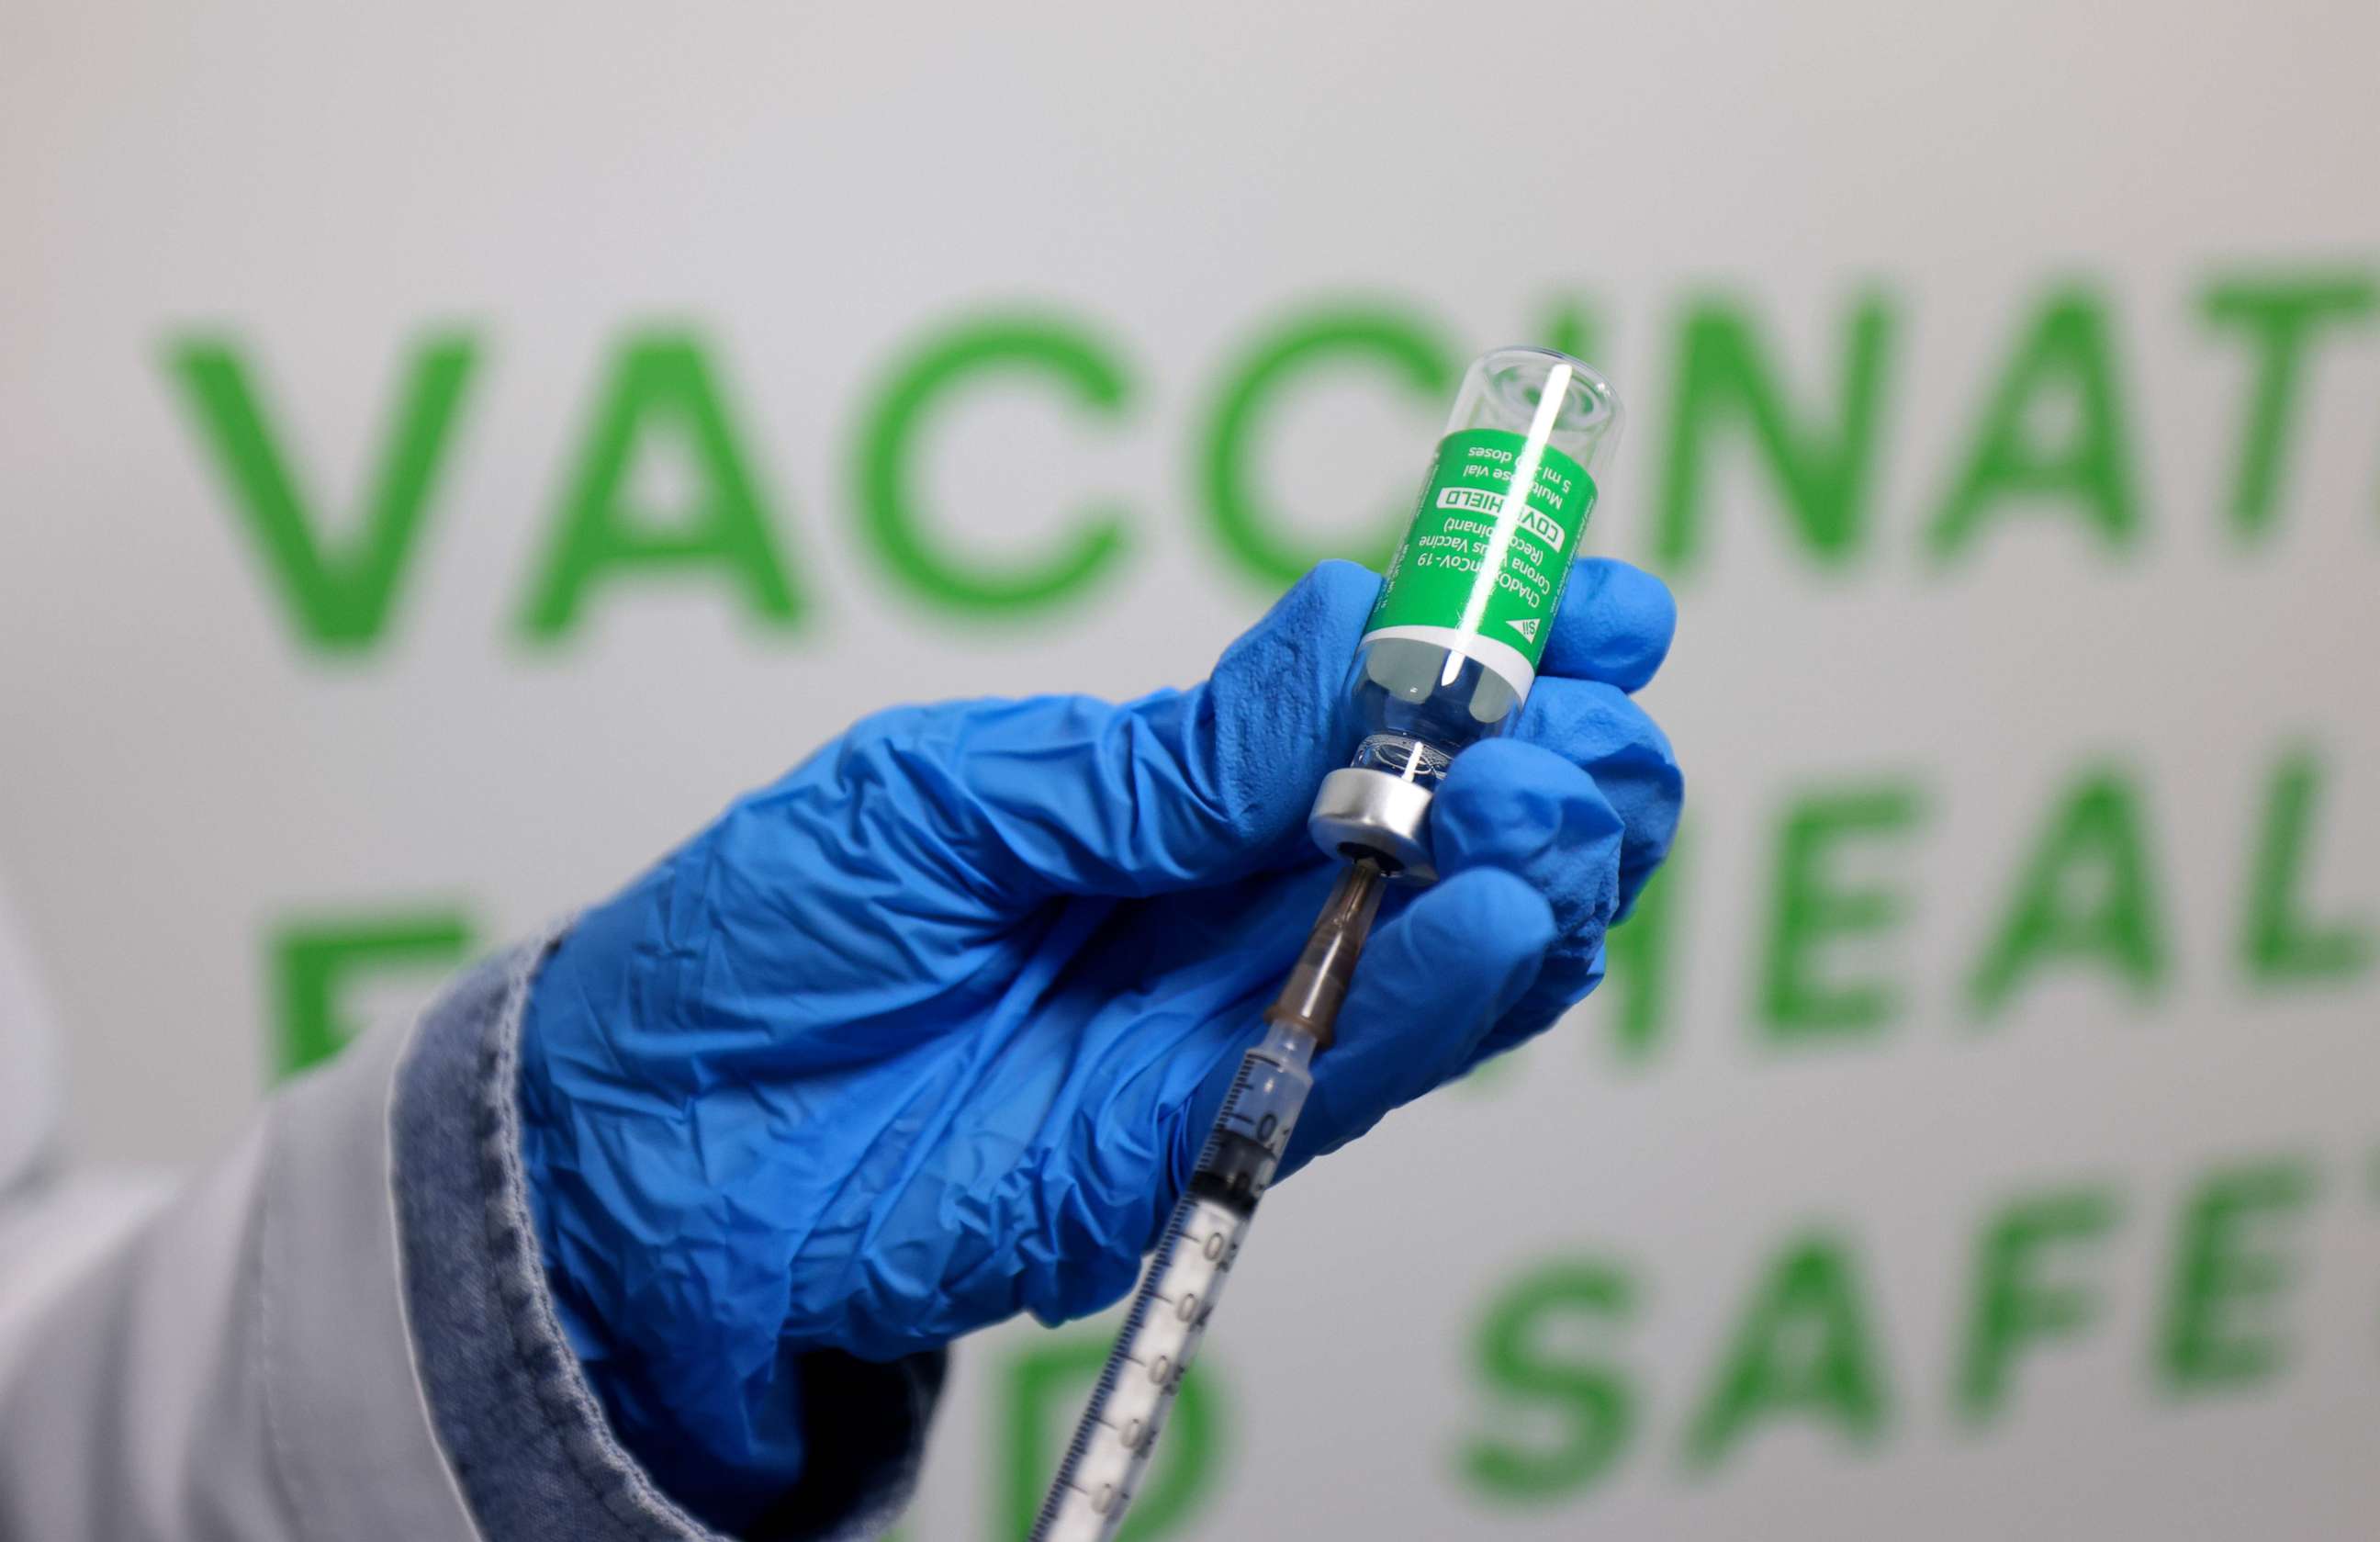 PHOTO: A health worker prepares an injection of the Oxford vaccine against the coronavirus at a vaccination centre set up at the Dubai International Financial Center in the Gulf emirate of Dubai, on February 3, 2021. 